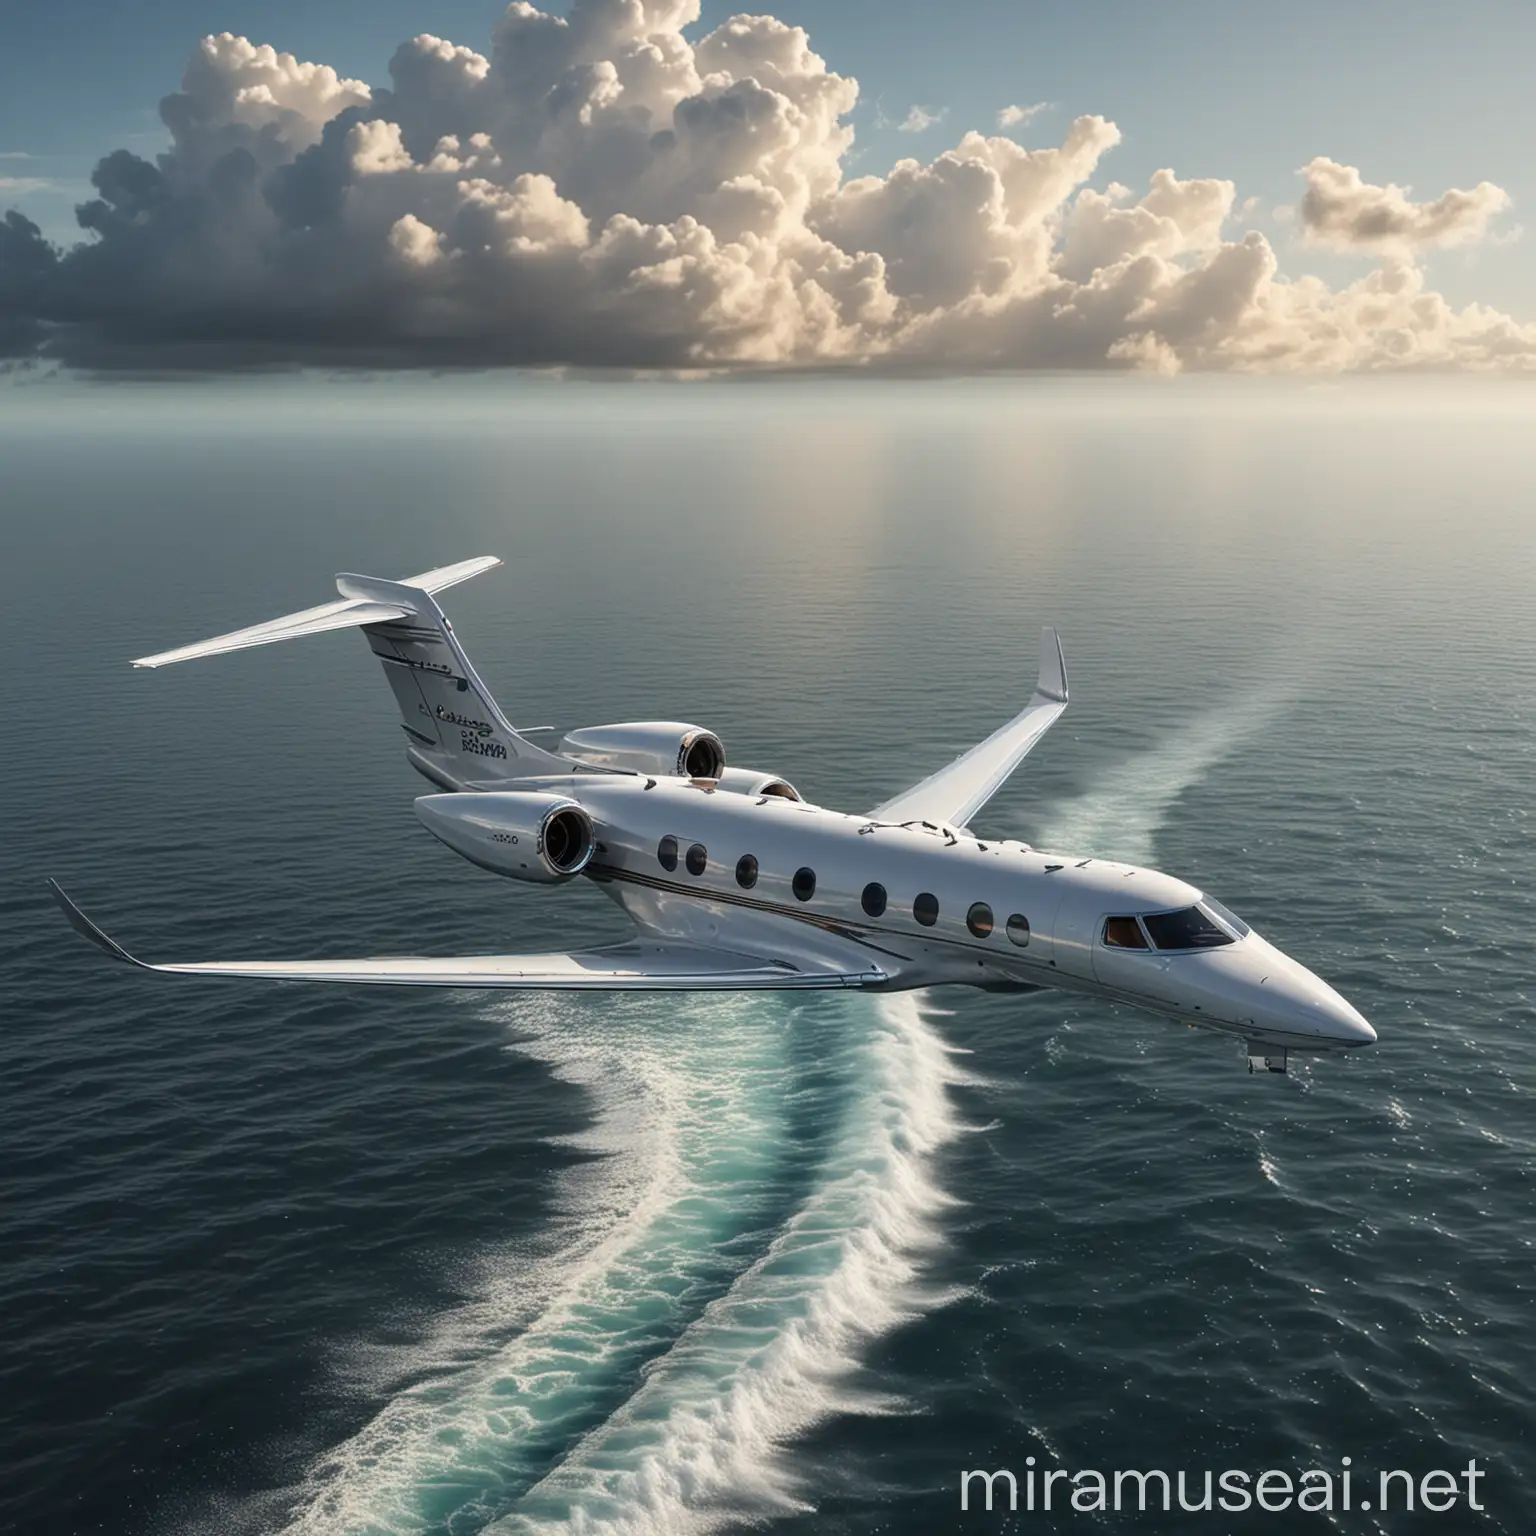 Realistic image of a gulfstream flying over the ocean